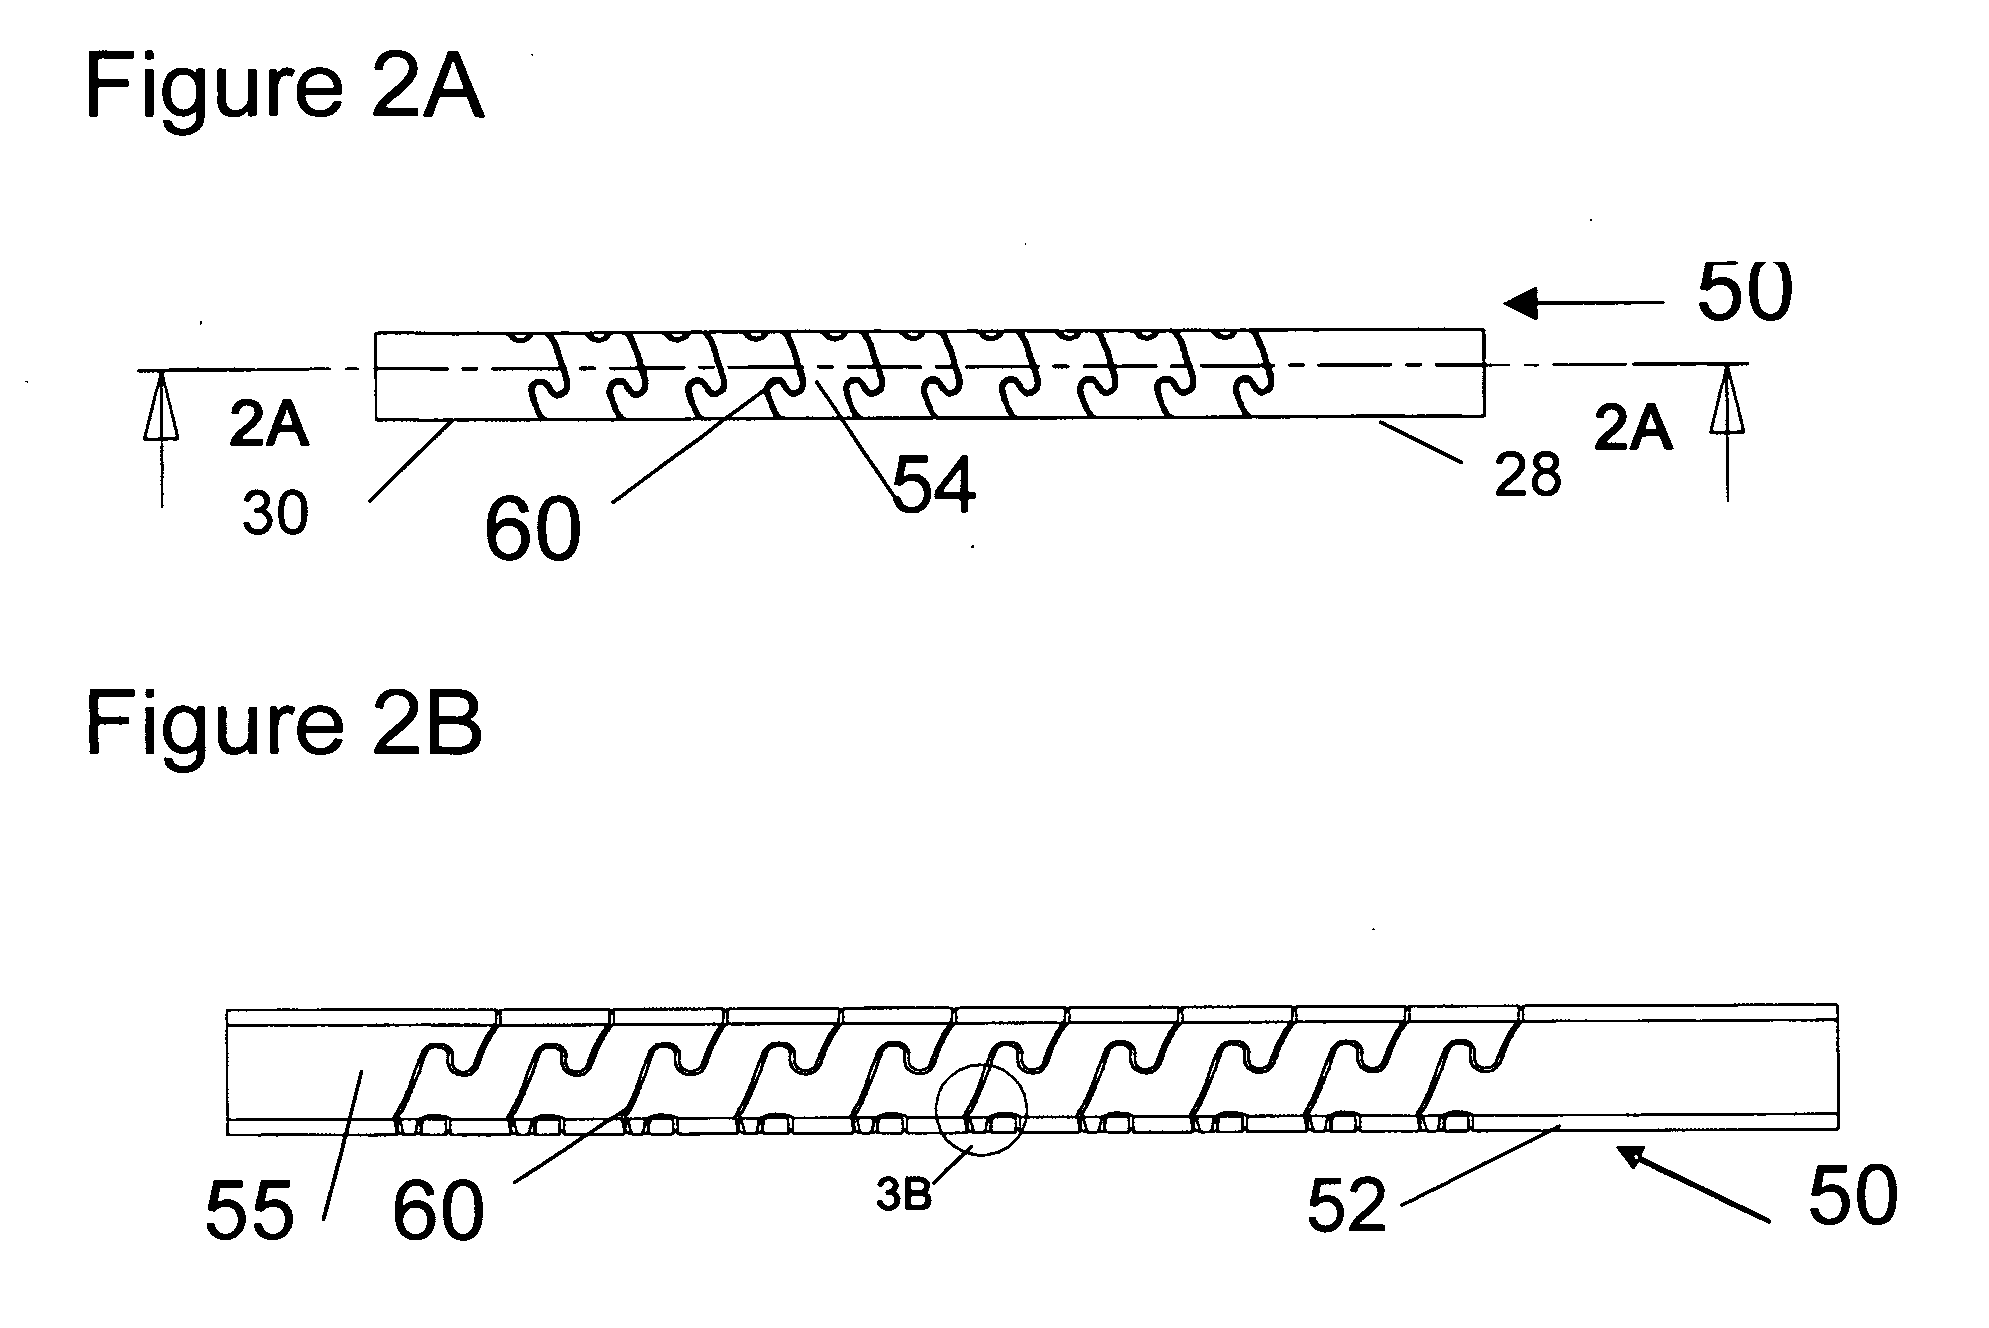 Flexible spine components